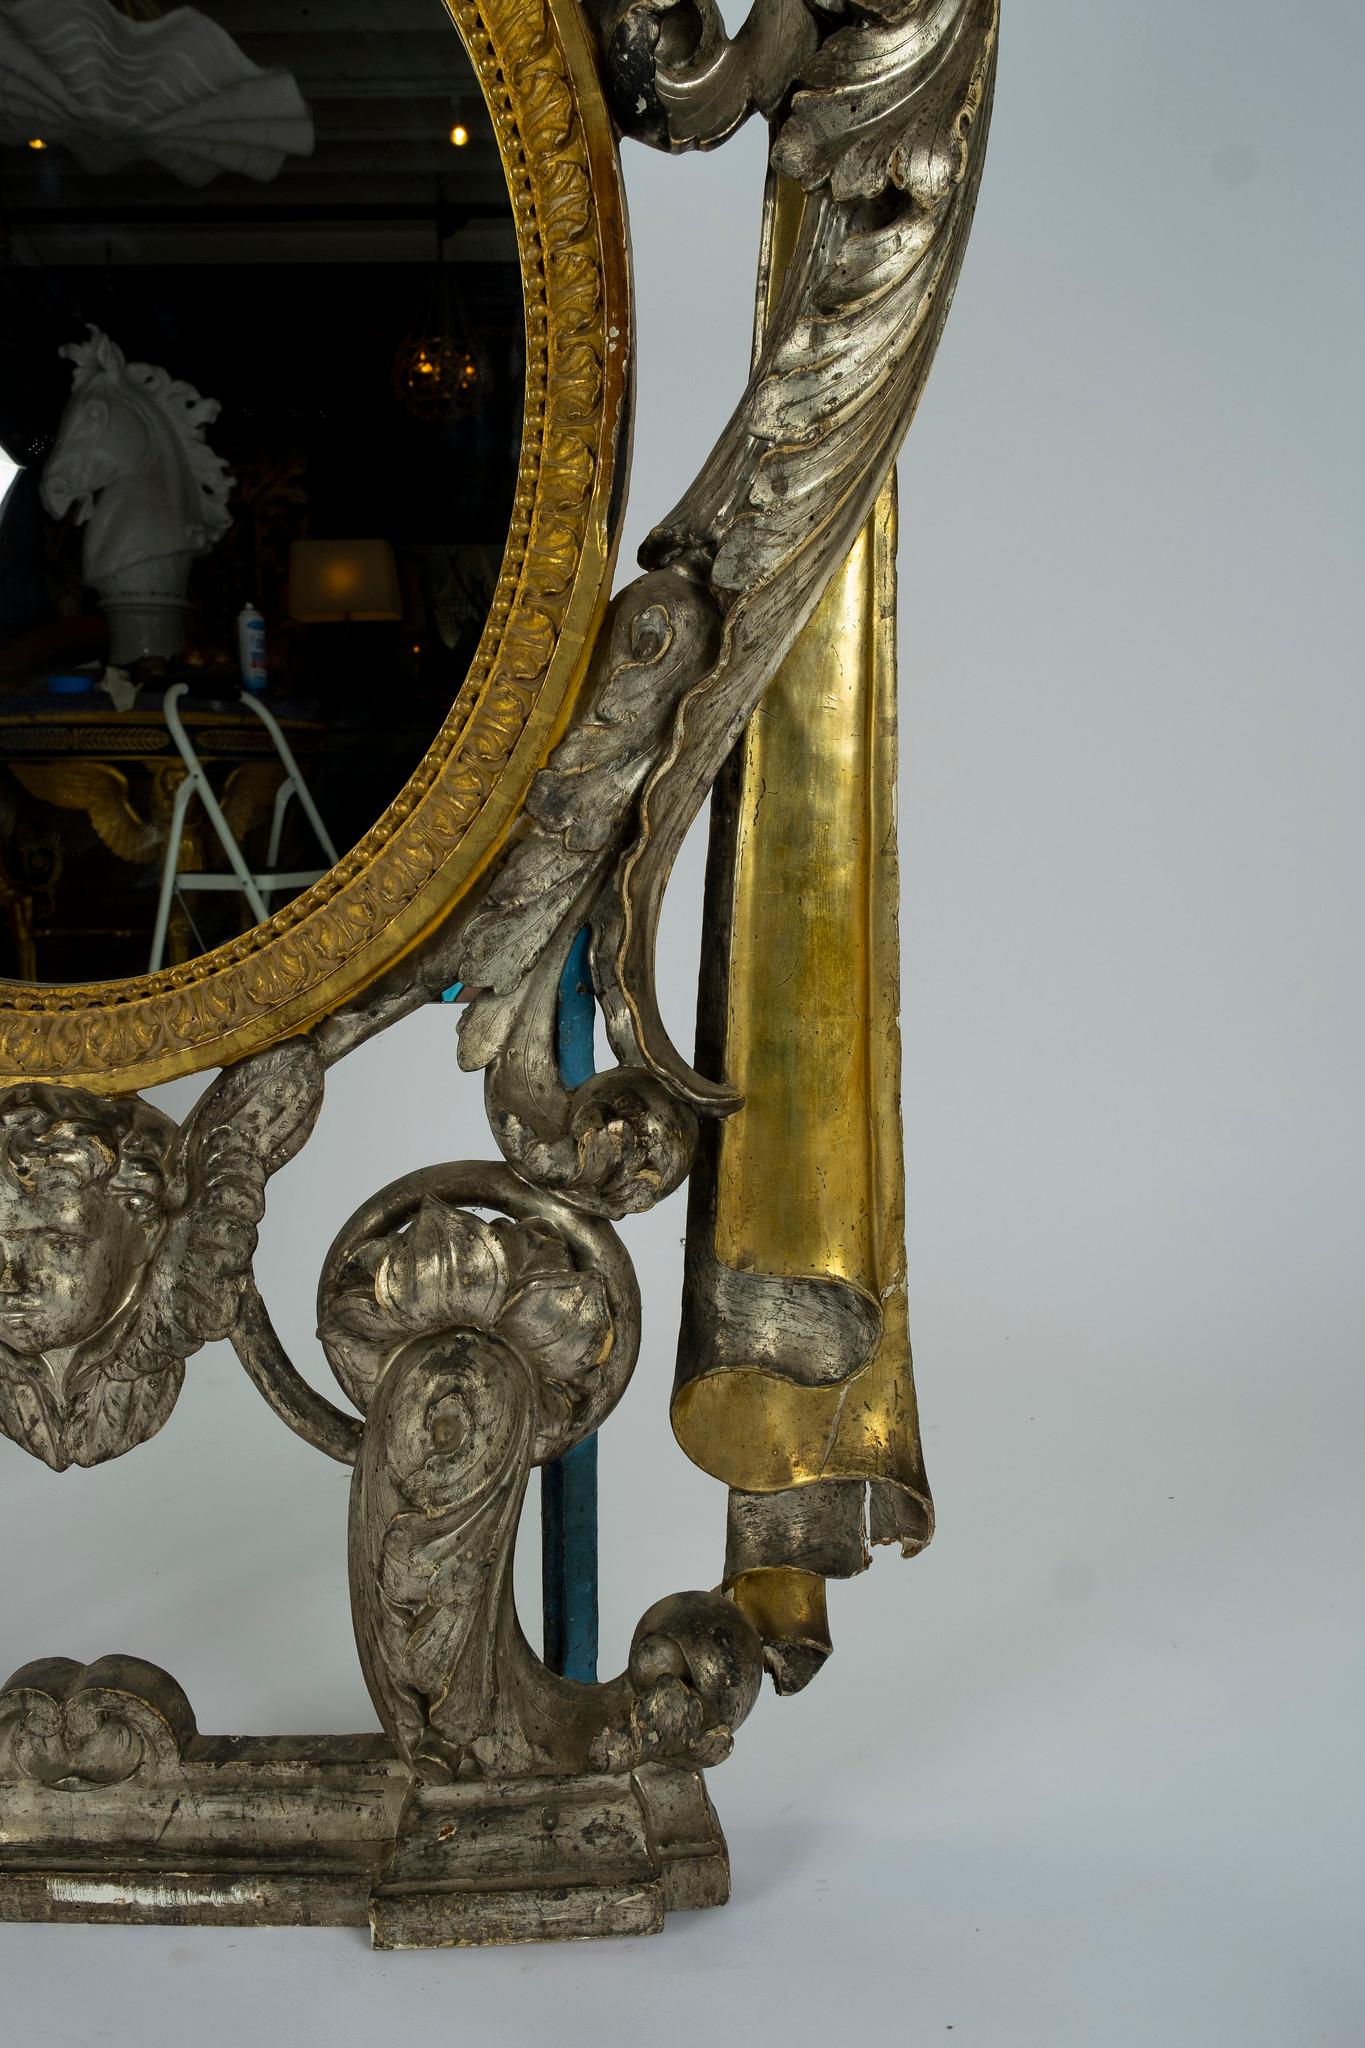 A stunning mirror from the French Renaissance. This period was the cultural and artistic movement in France and is clearly depicted in the hand carved detailing of drapes, scrolling acanthus with religious angel and rays on this silver and gold